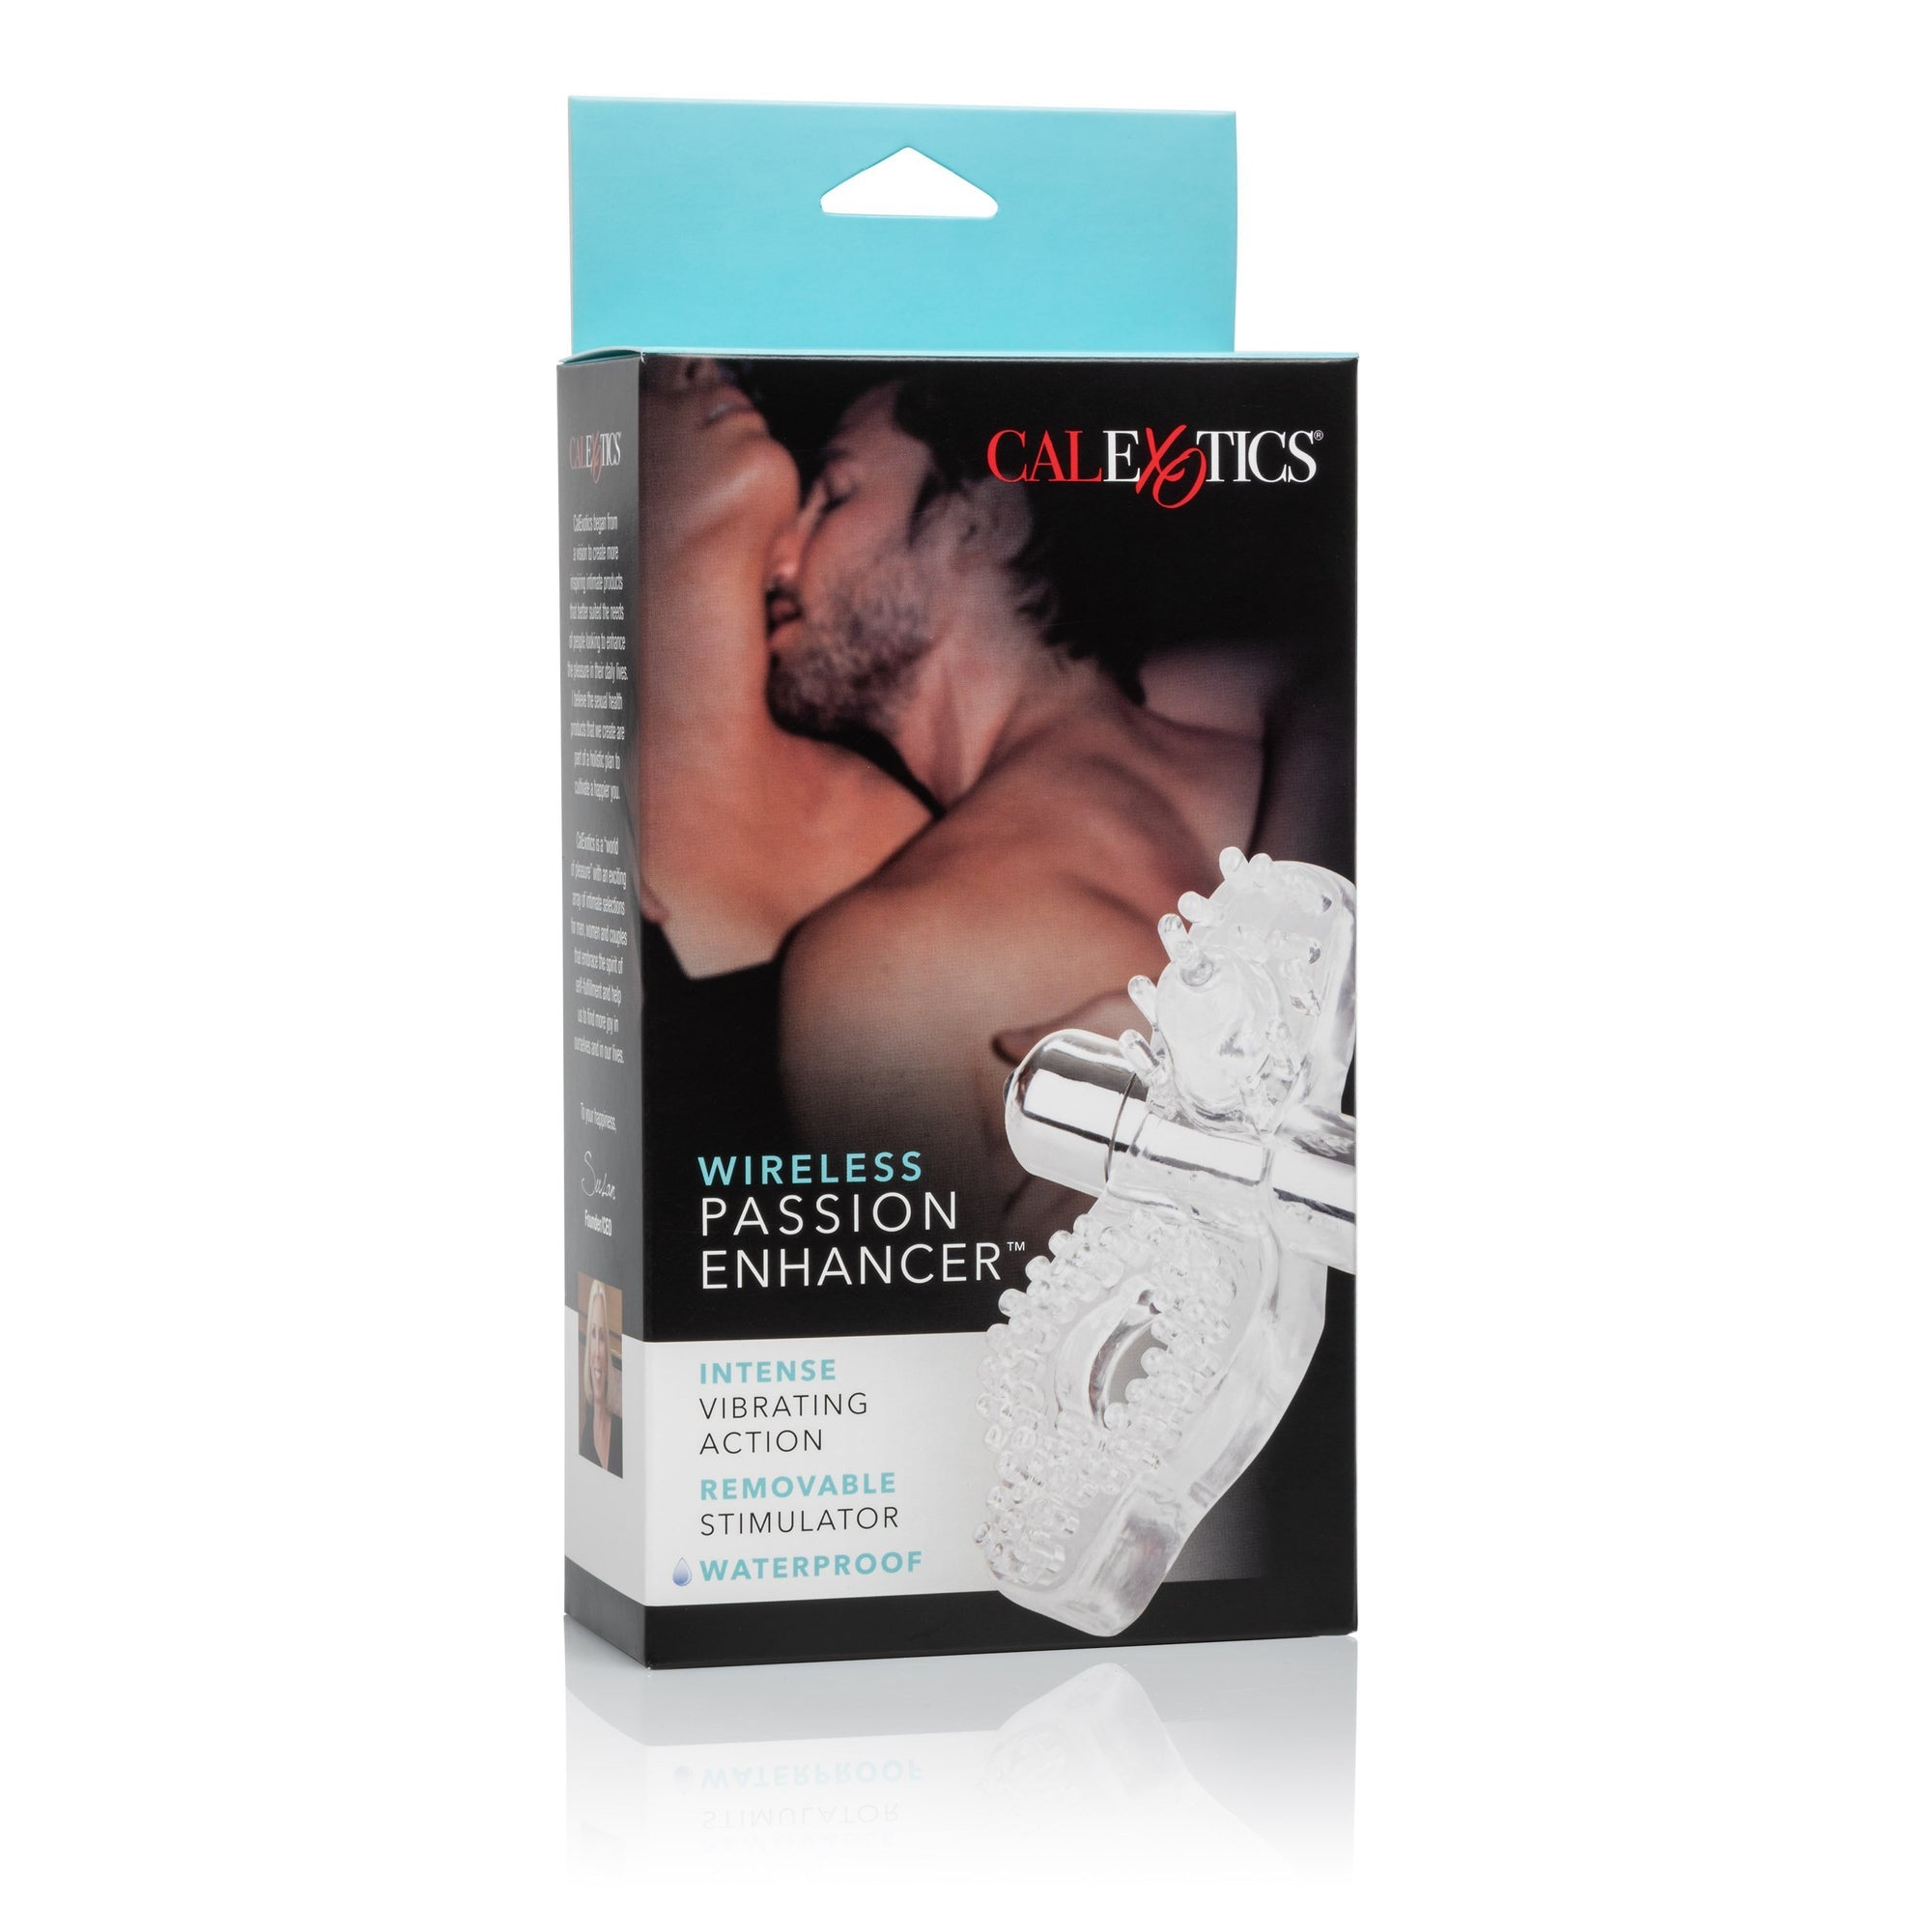 California Exotics - Wireless Passion Enhancer Vibrating Cock Ring (Clear) Rubber Cock Ring (Vibration) Non Rechargeable Singapore